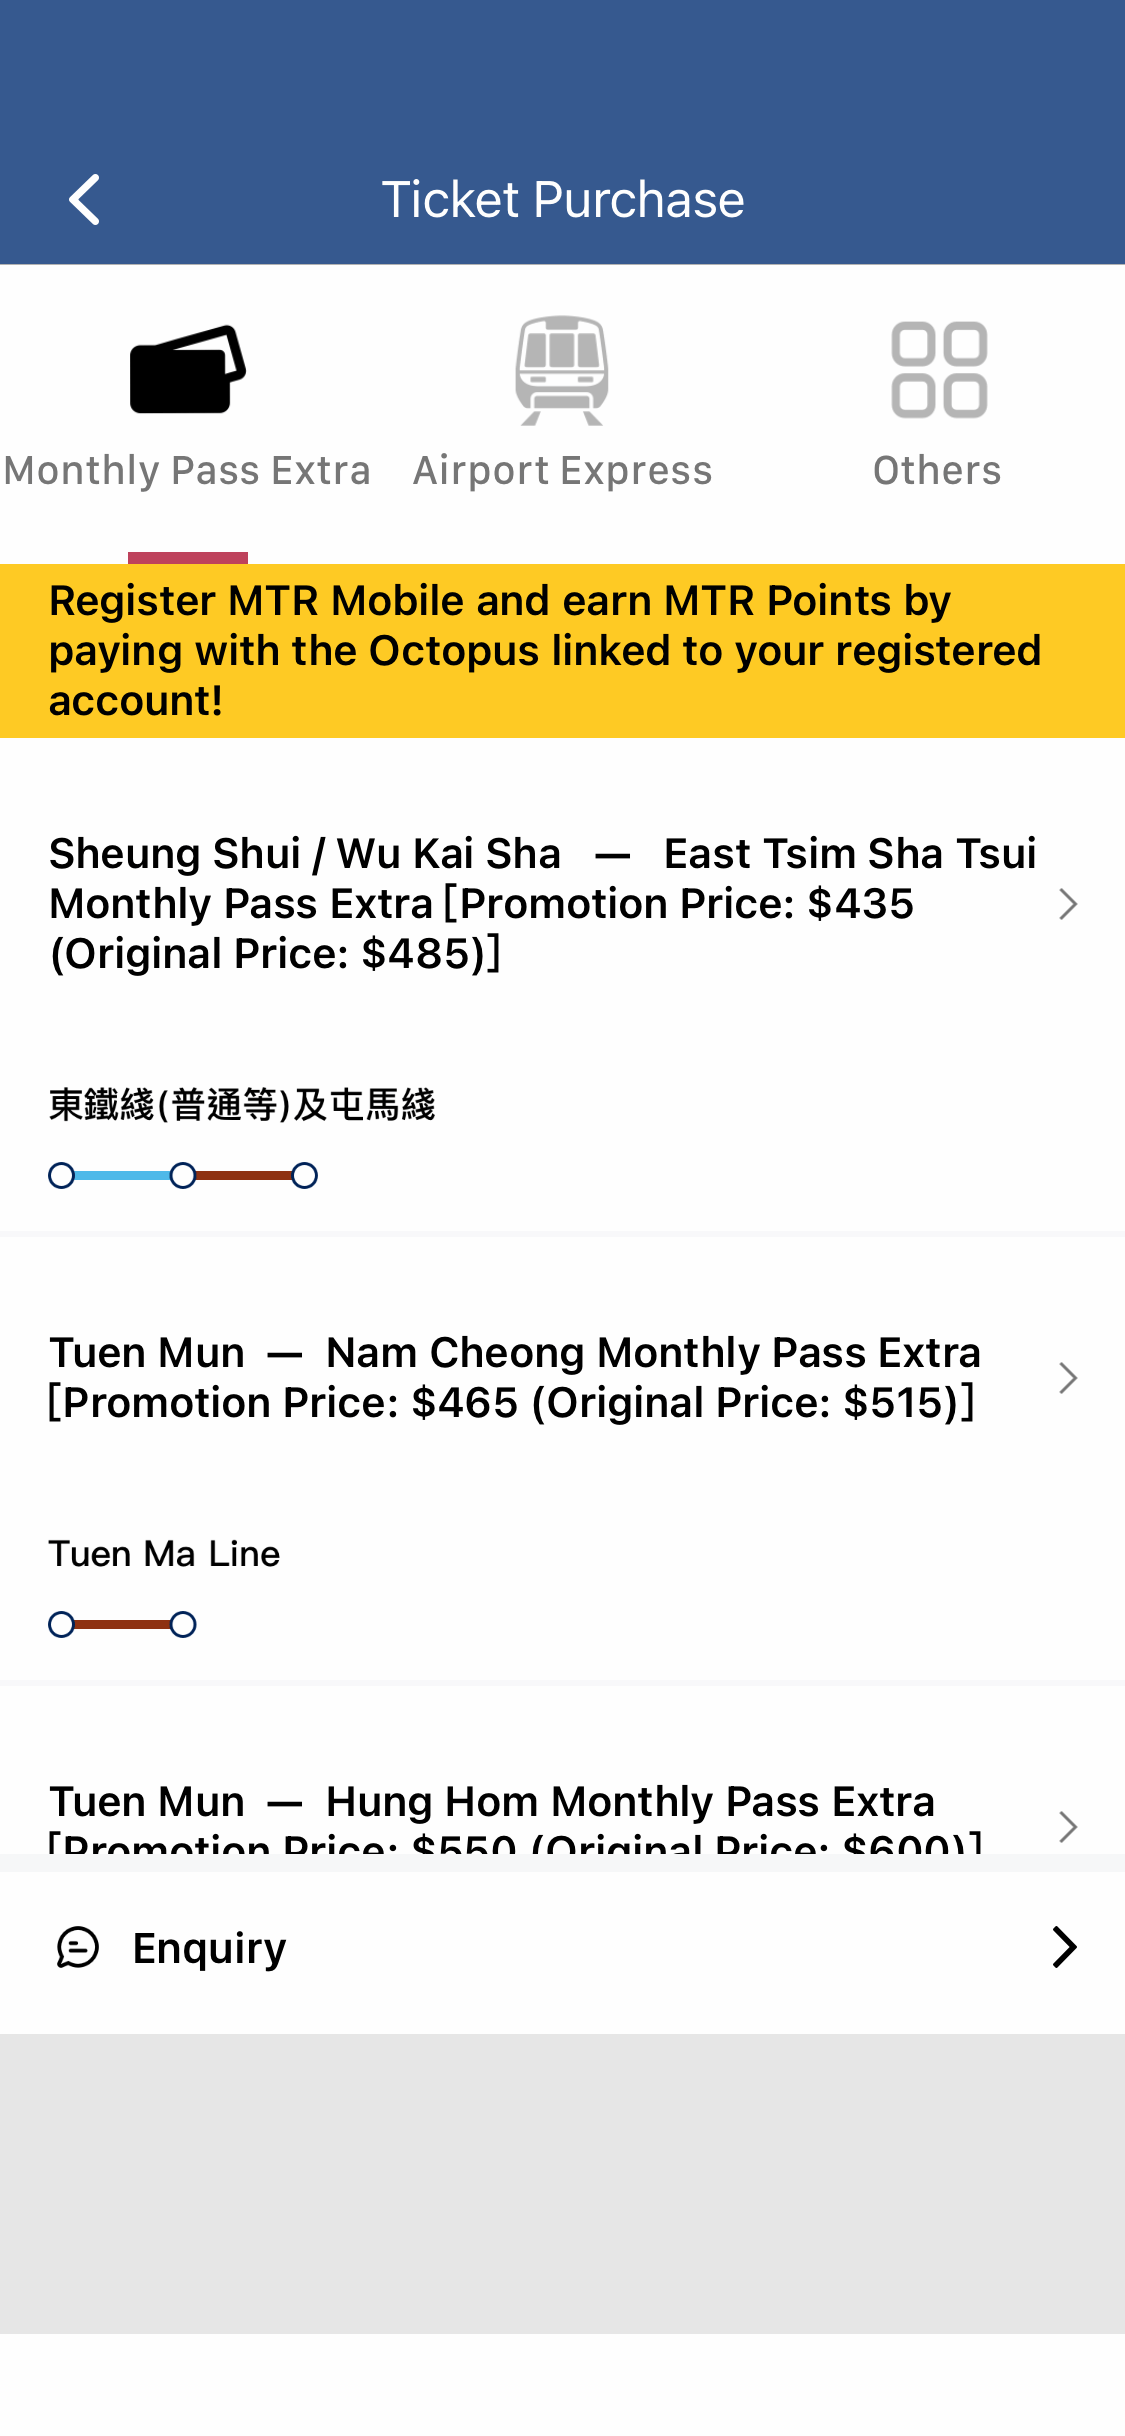 Select the Monthly Pass Extra you need